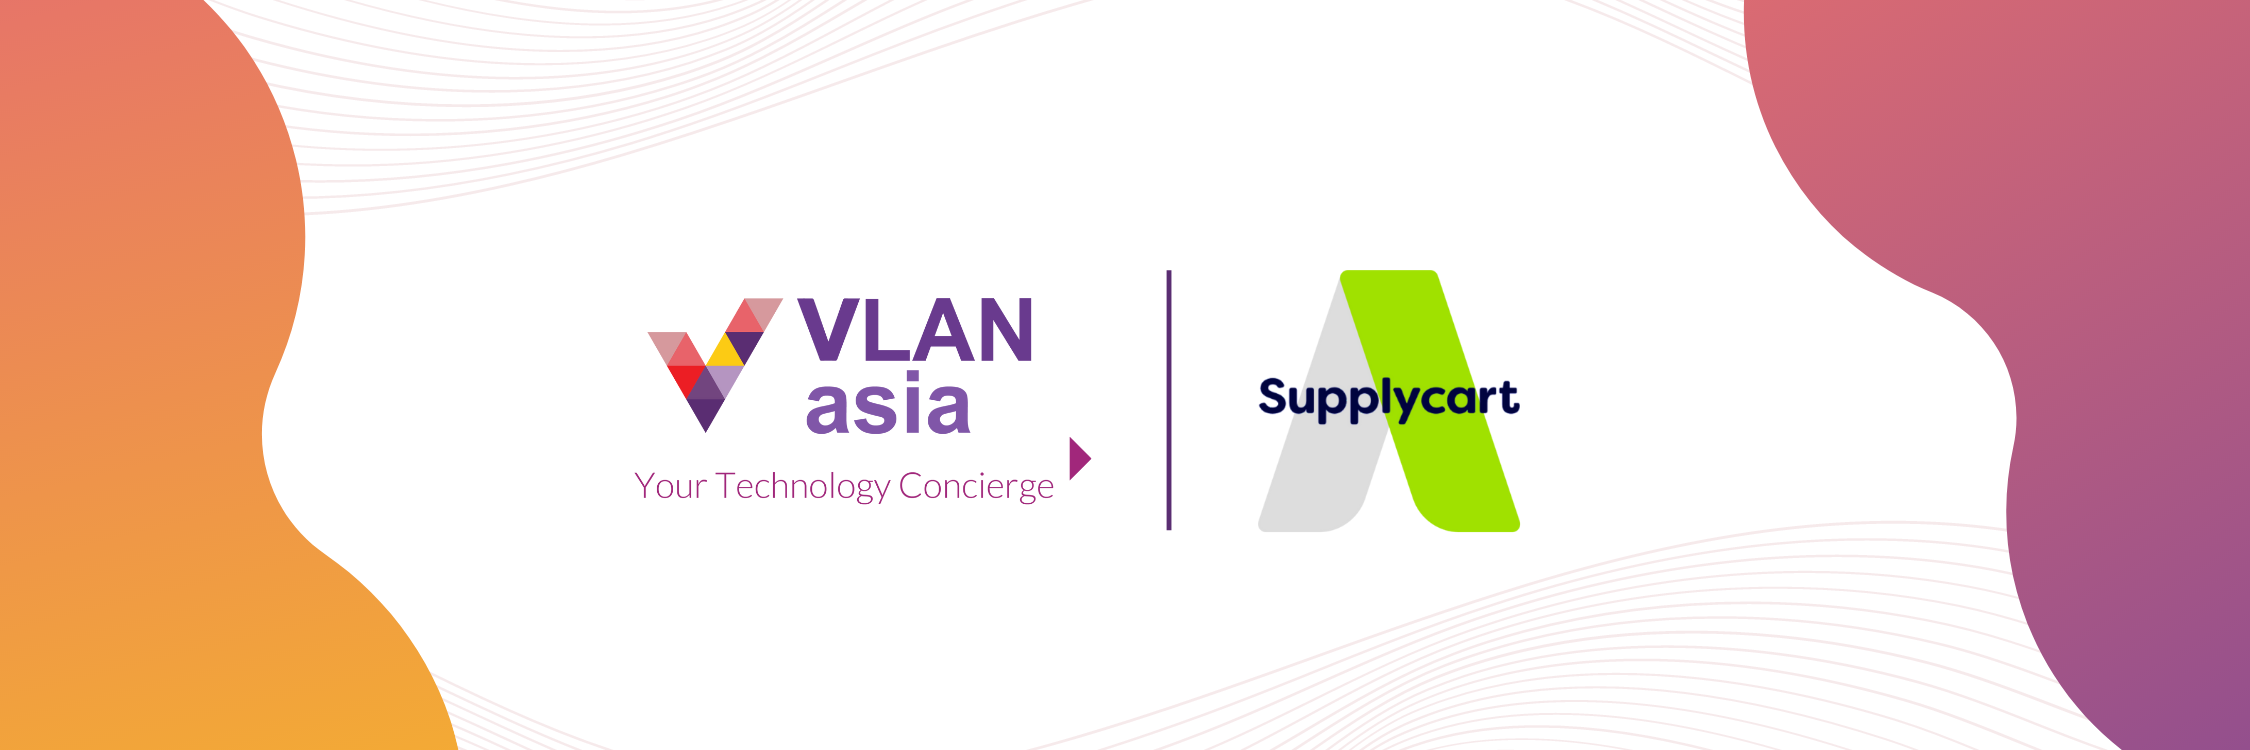 MoU Vlan Asia and supplycart